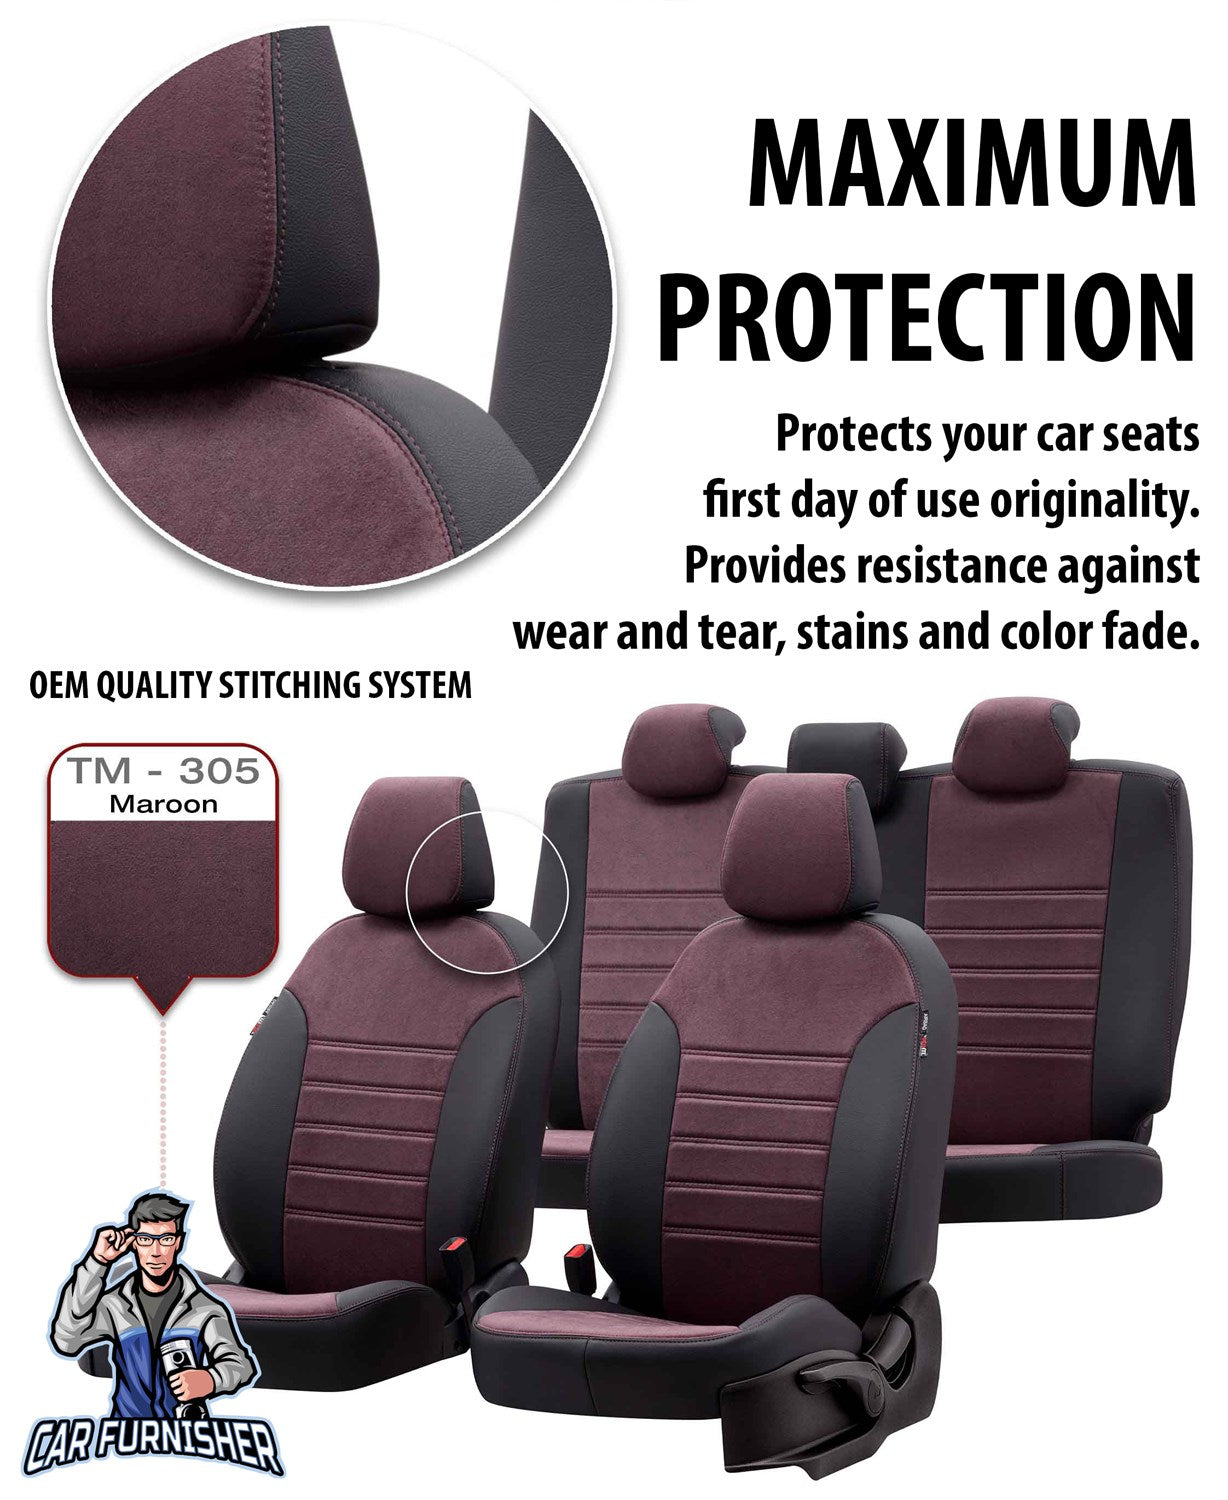 Nissan X-Trail Seat Covers Milano Suede Design Beige Leather & Suede Fabric